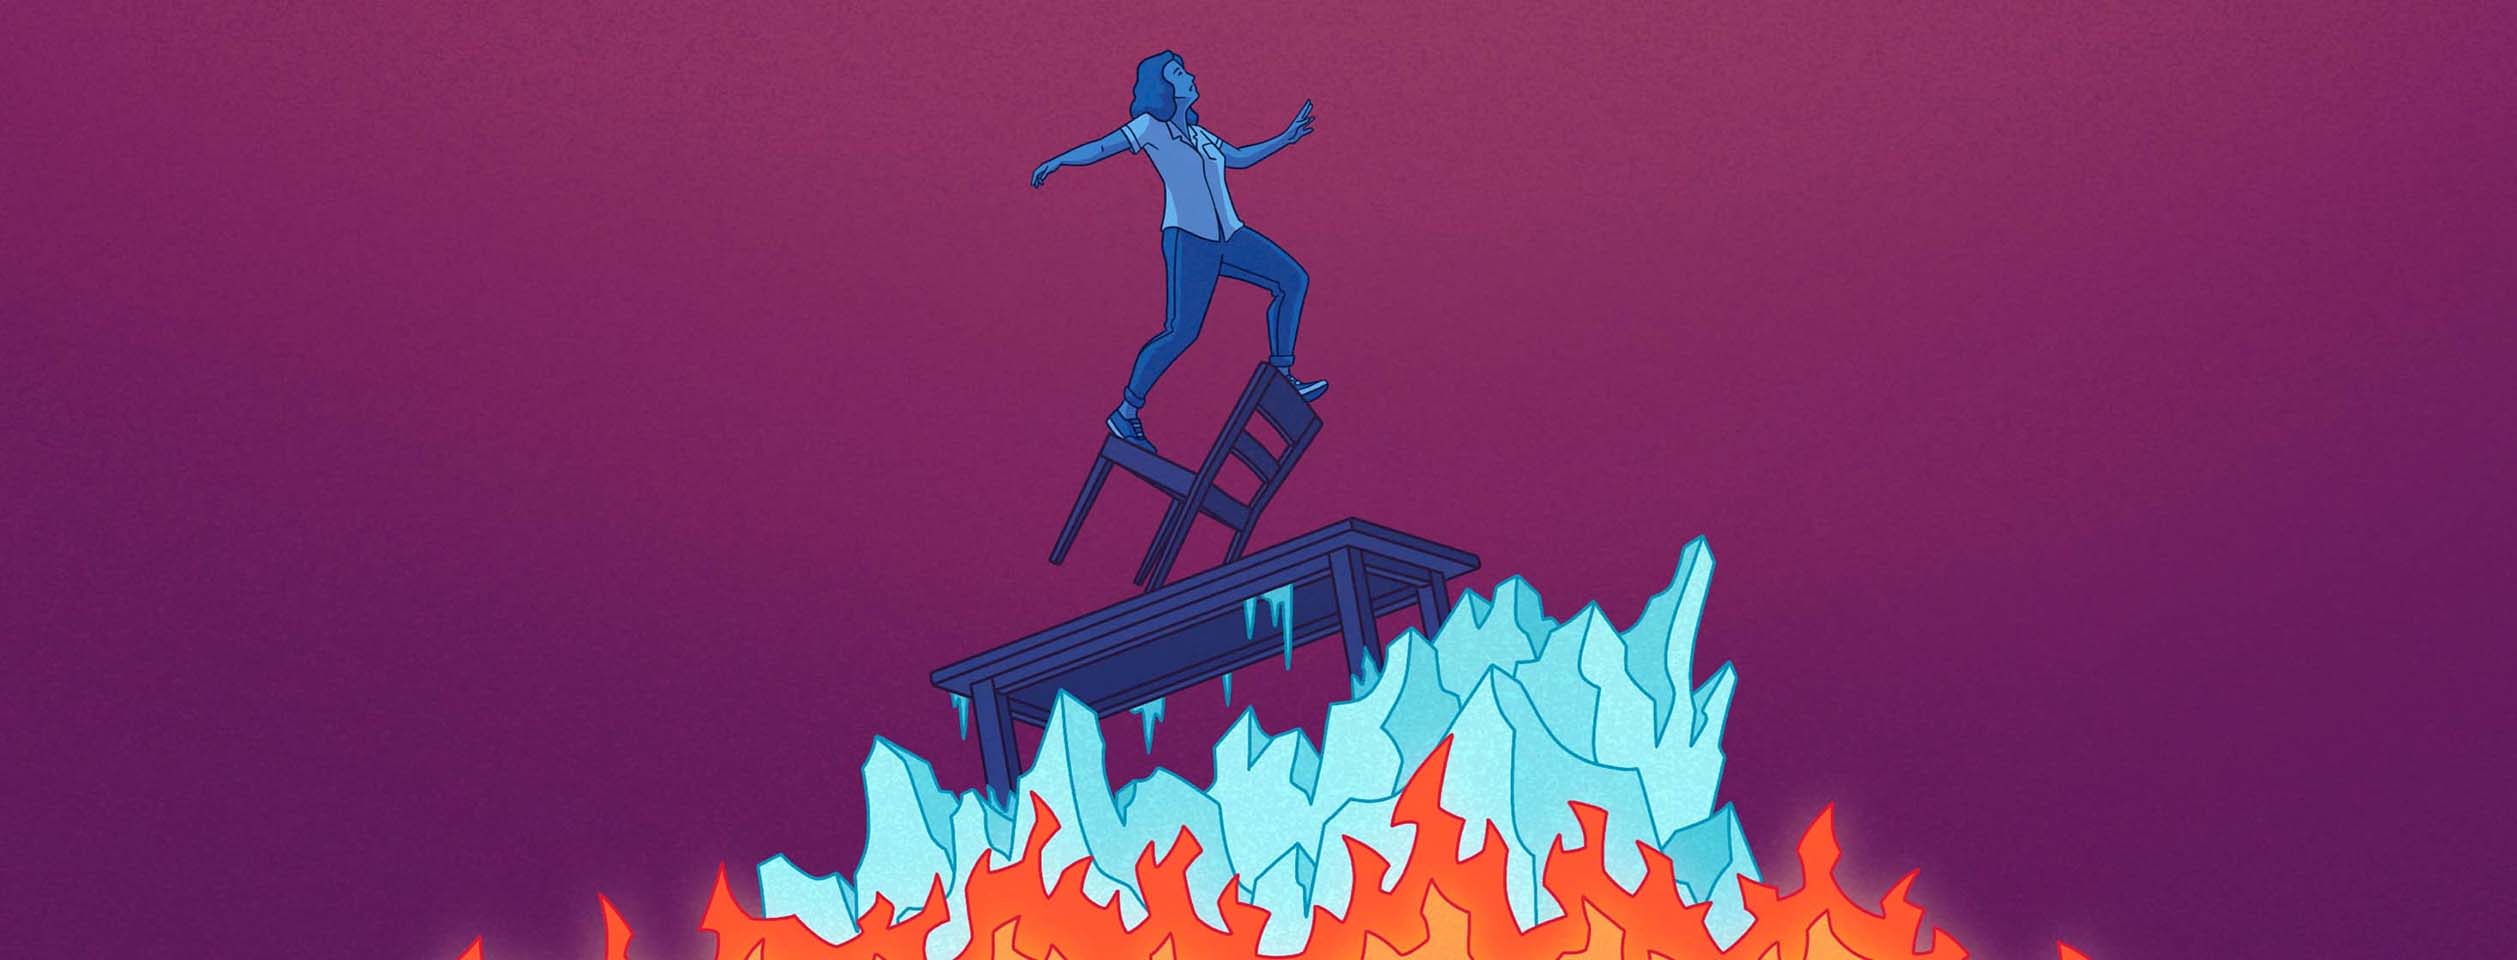 A woman struggles to balance on a pyramid of fire, ice, and furniture